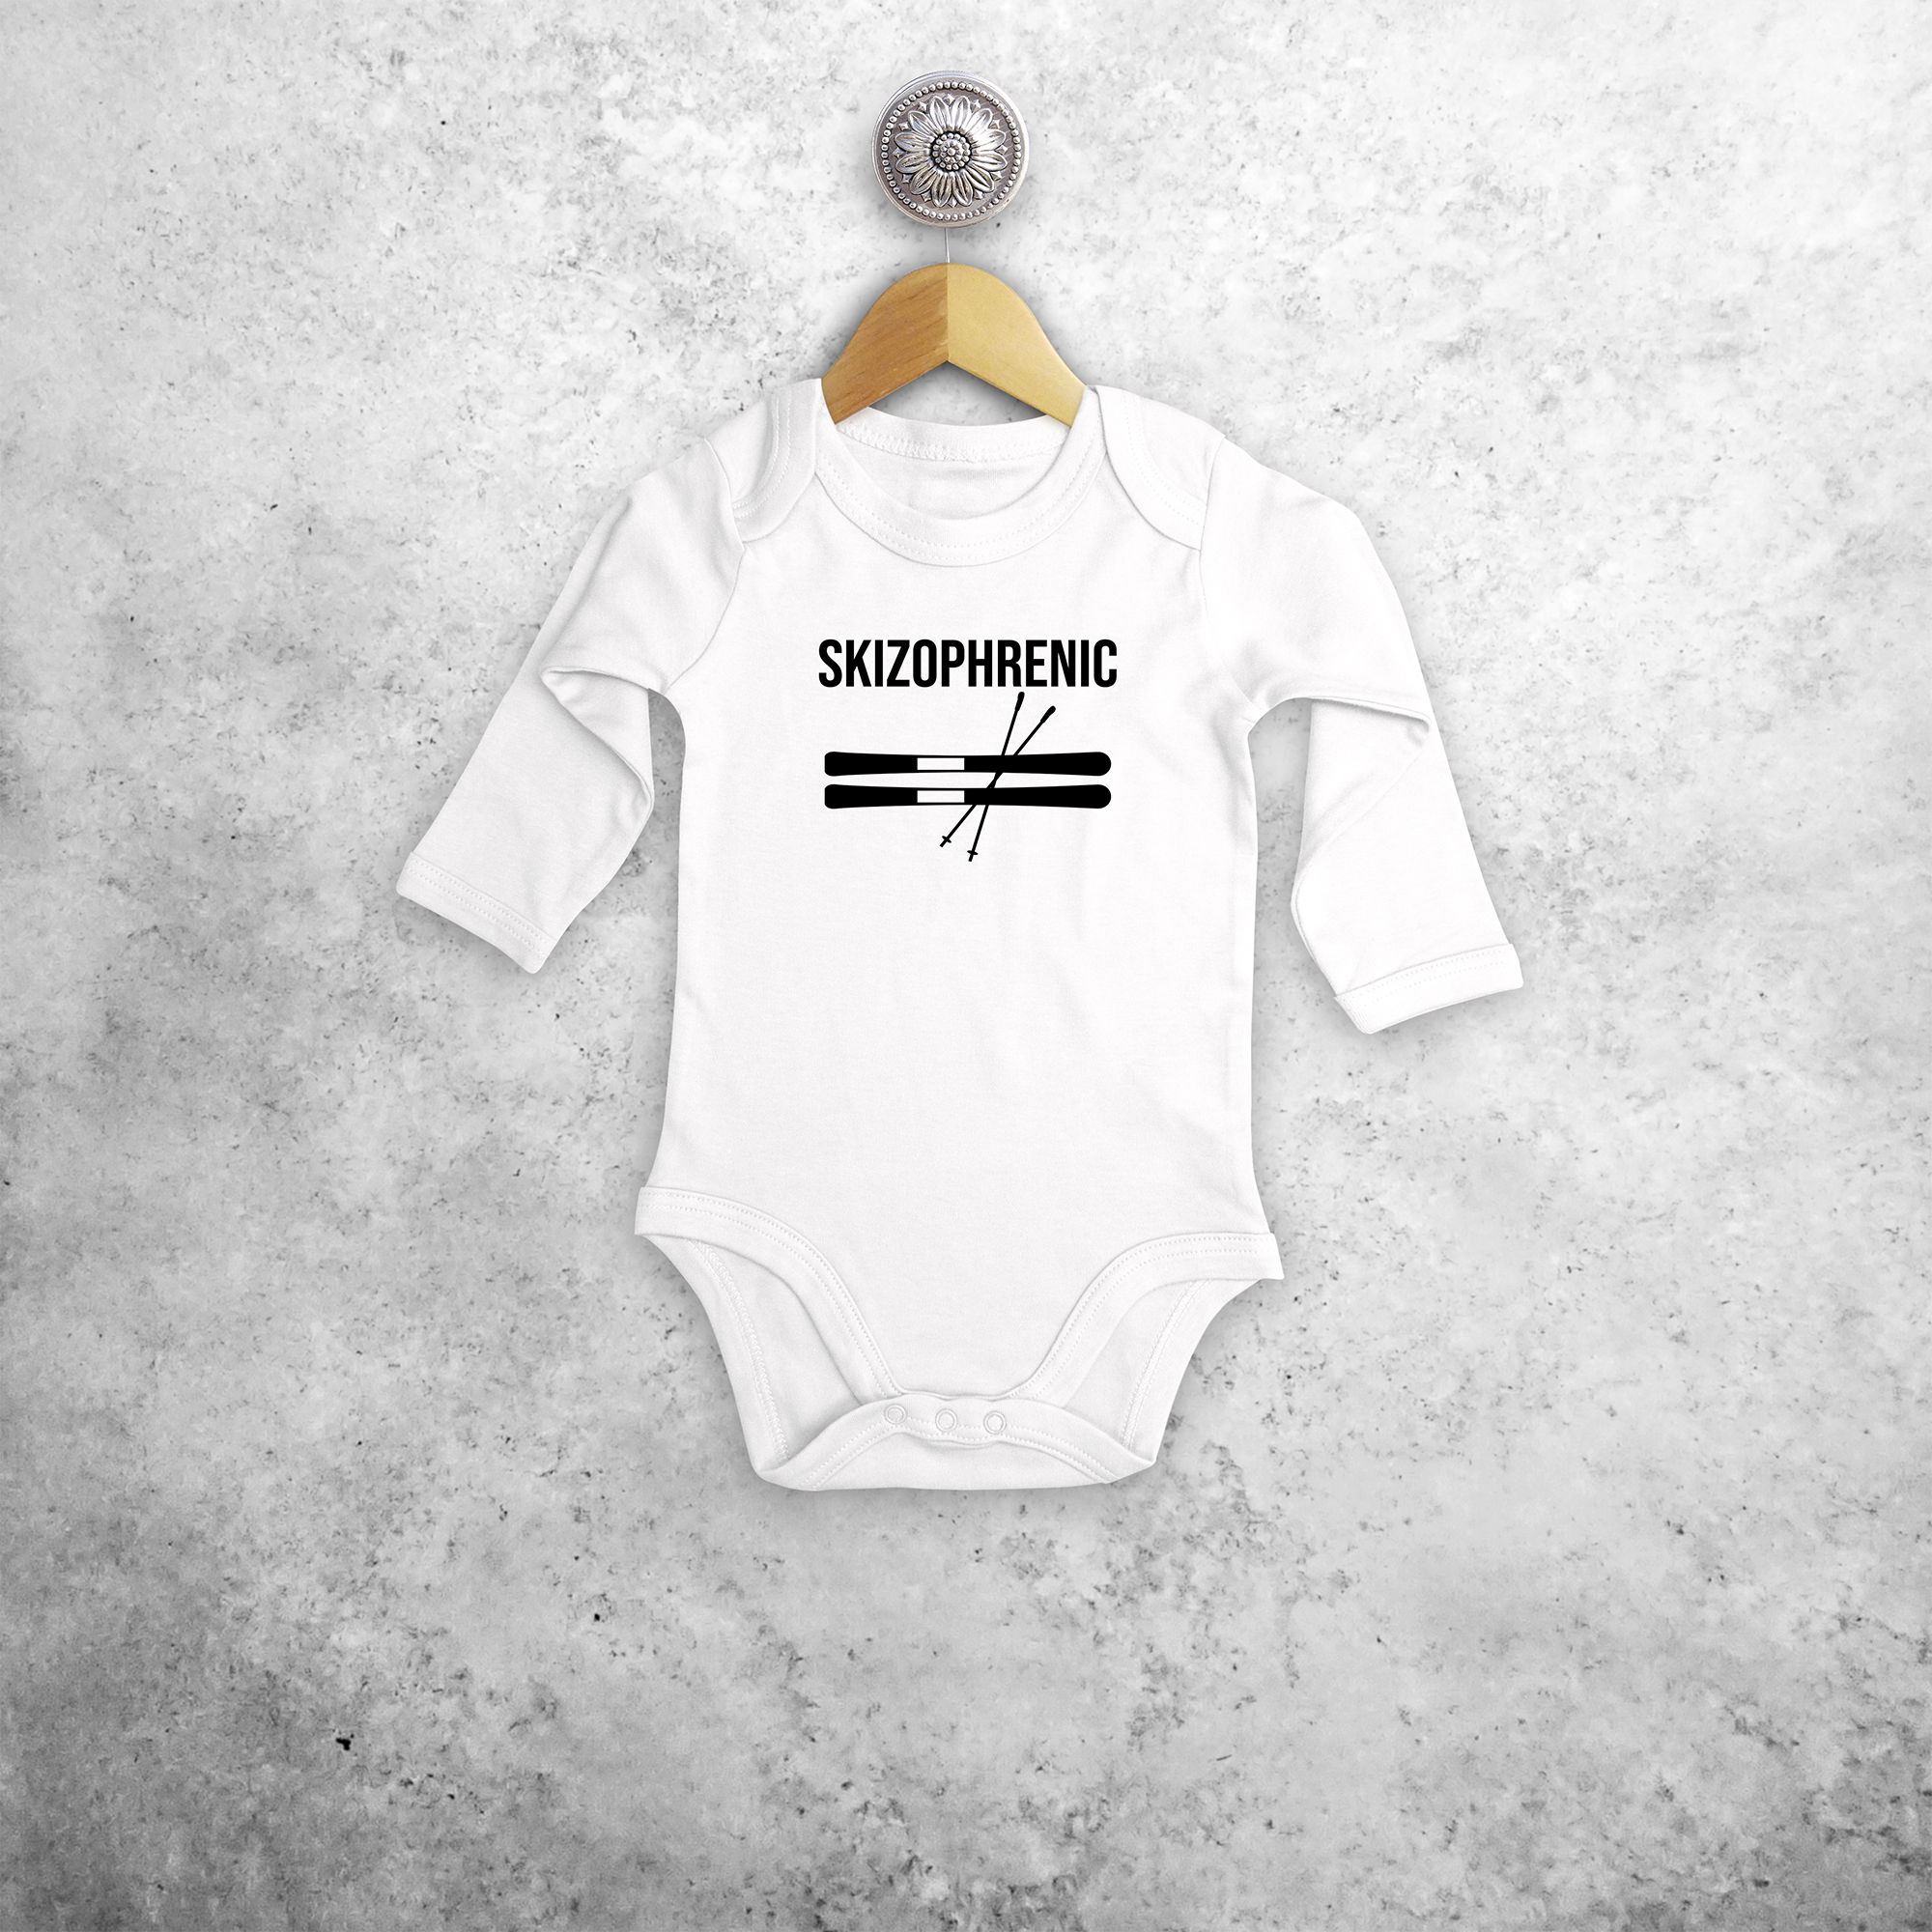 Baby or toddler bodysuit with long sleeves, with ‘Skizophrenic’ print by KMLeon.